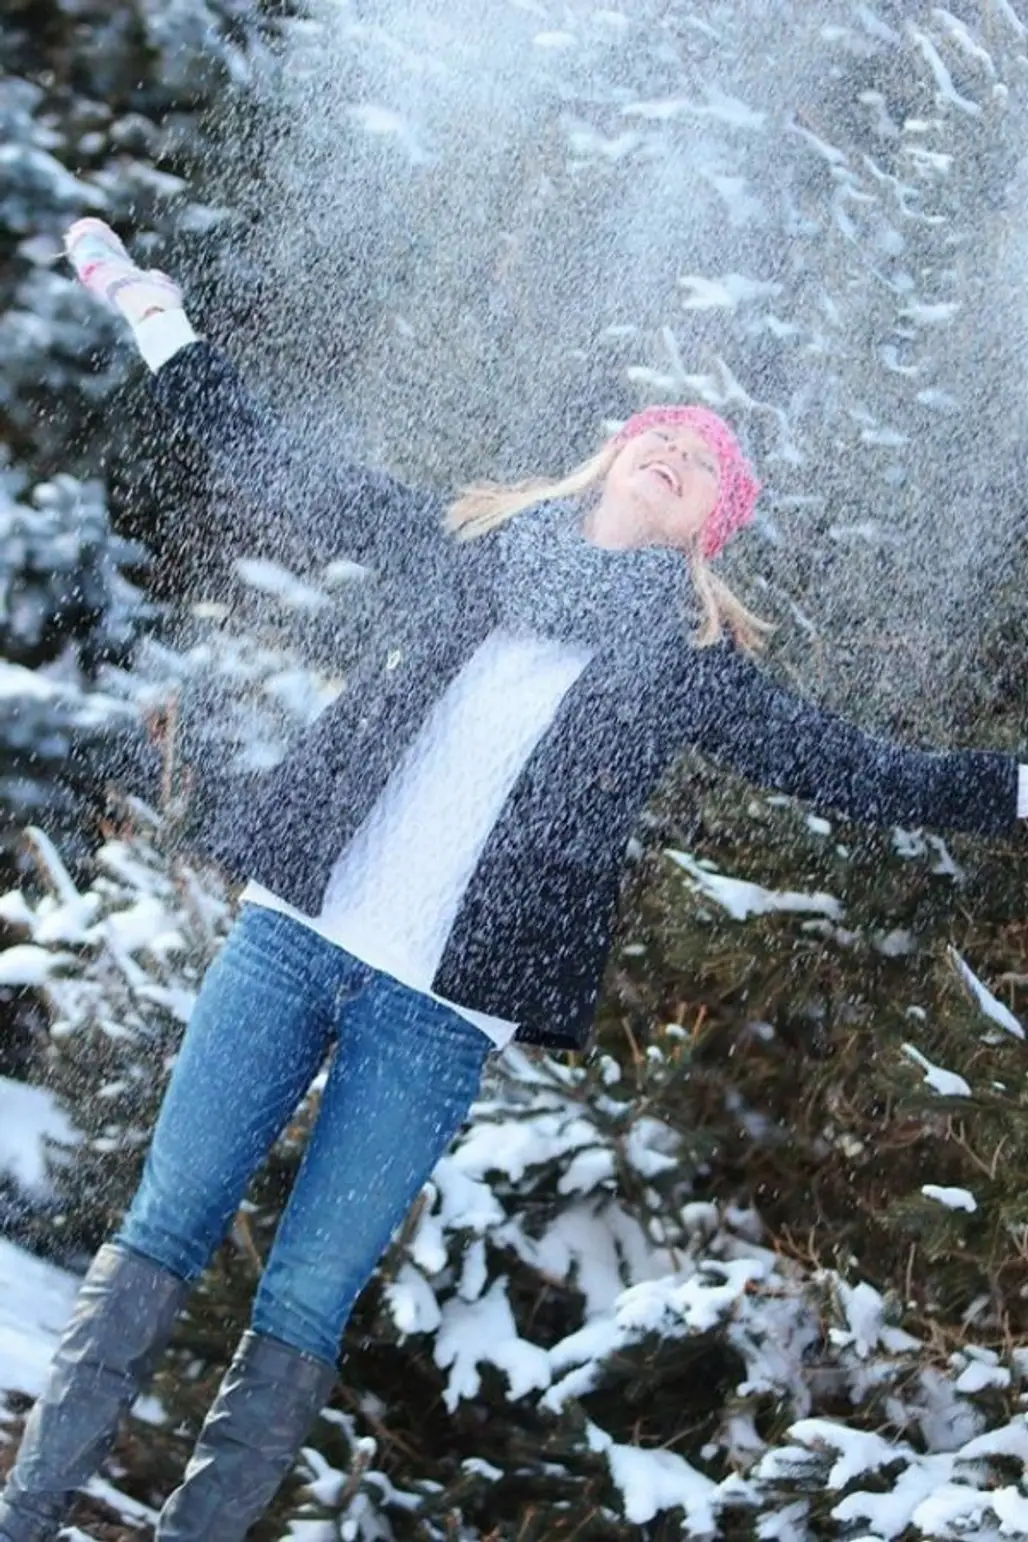 Throwing Snow